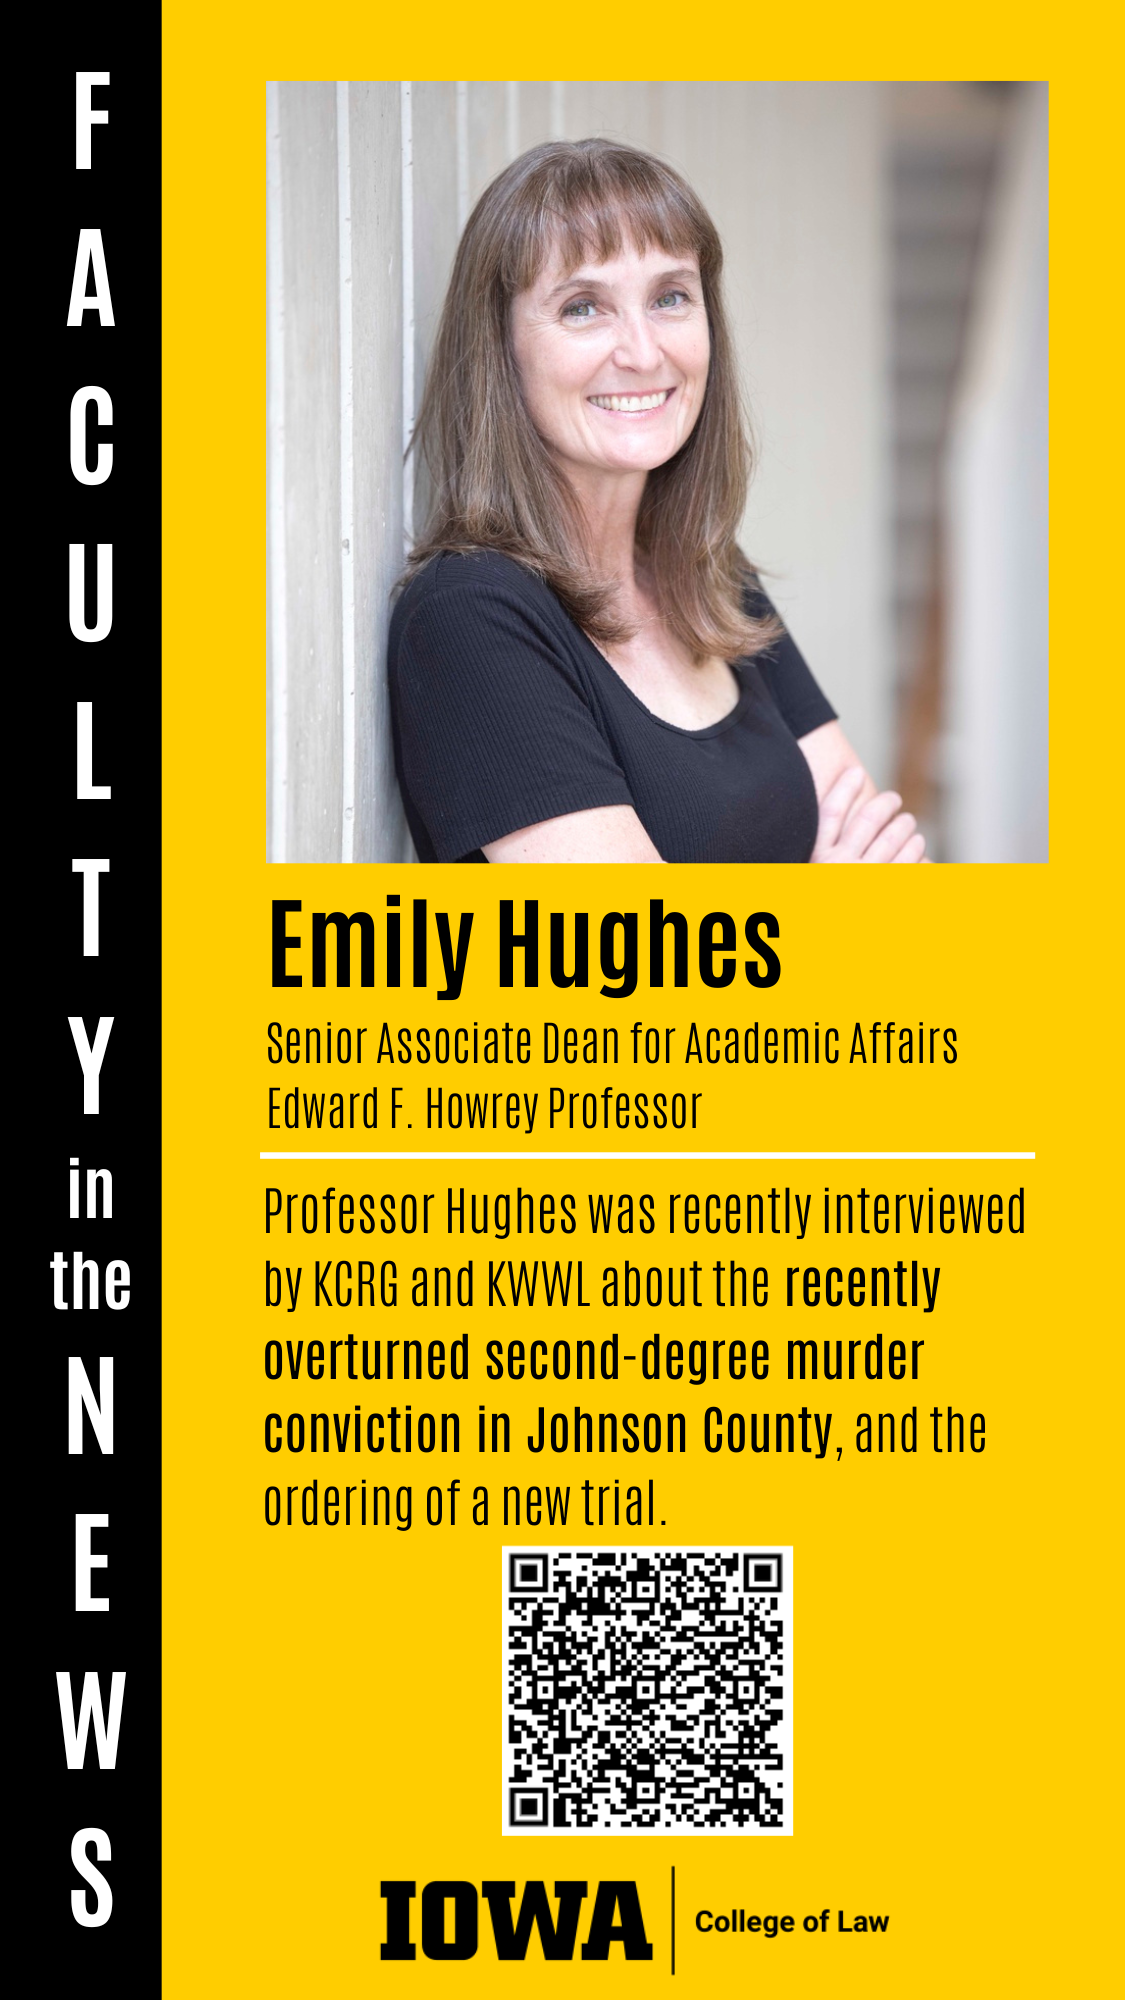 F A C U L T Y in the N E W S Senior Associate Dean for Academic Affairs Edward F. Howrey Professor Professor Hughes was recently interviewed by KCRG and KWWL about the recently overturned second-degree murder conviction in Johnson County, and the ordering of a new trial. Emily Hughes